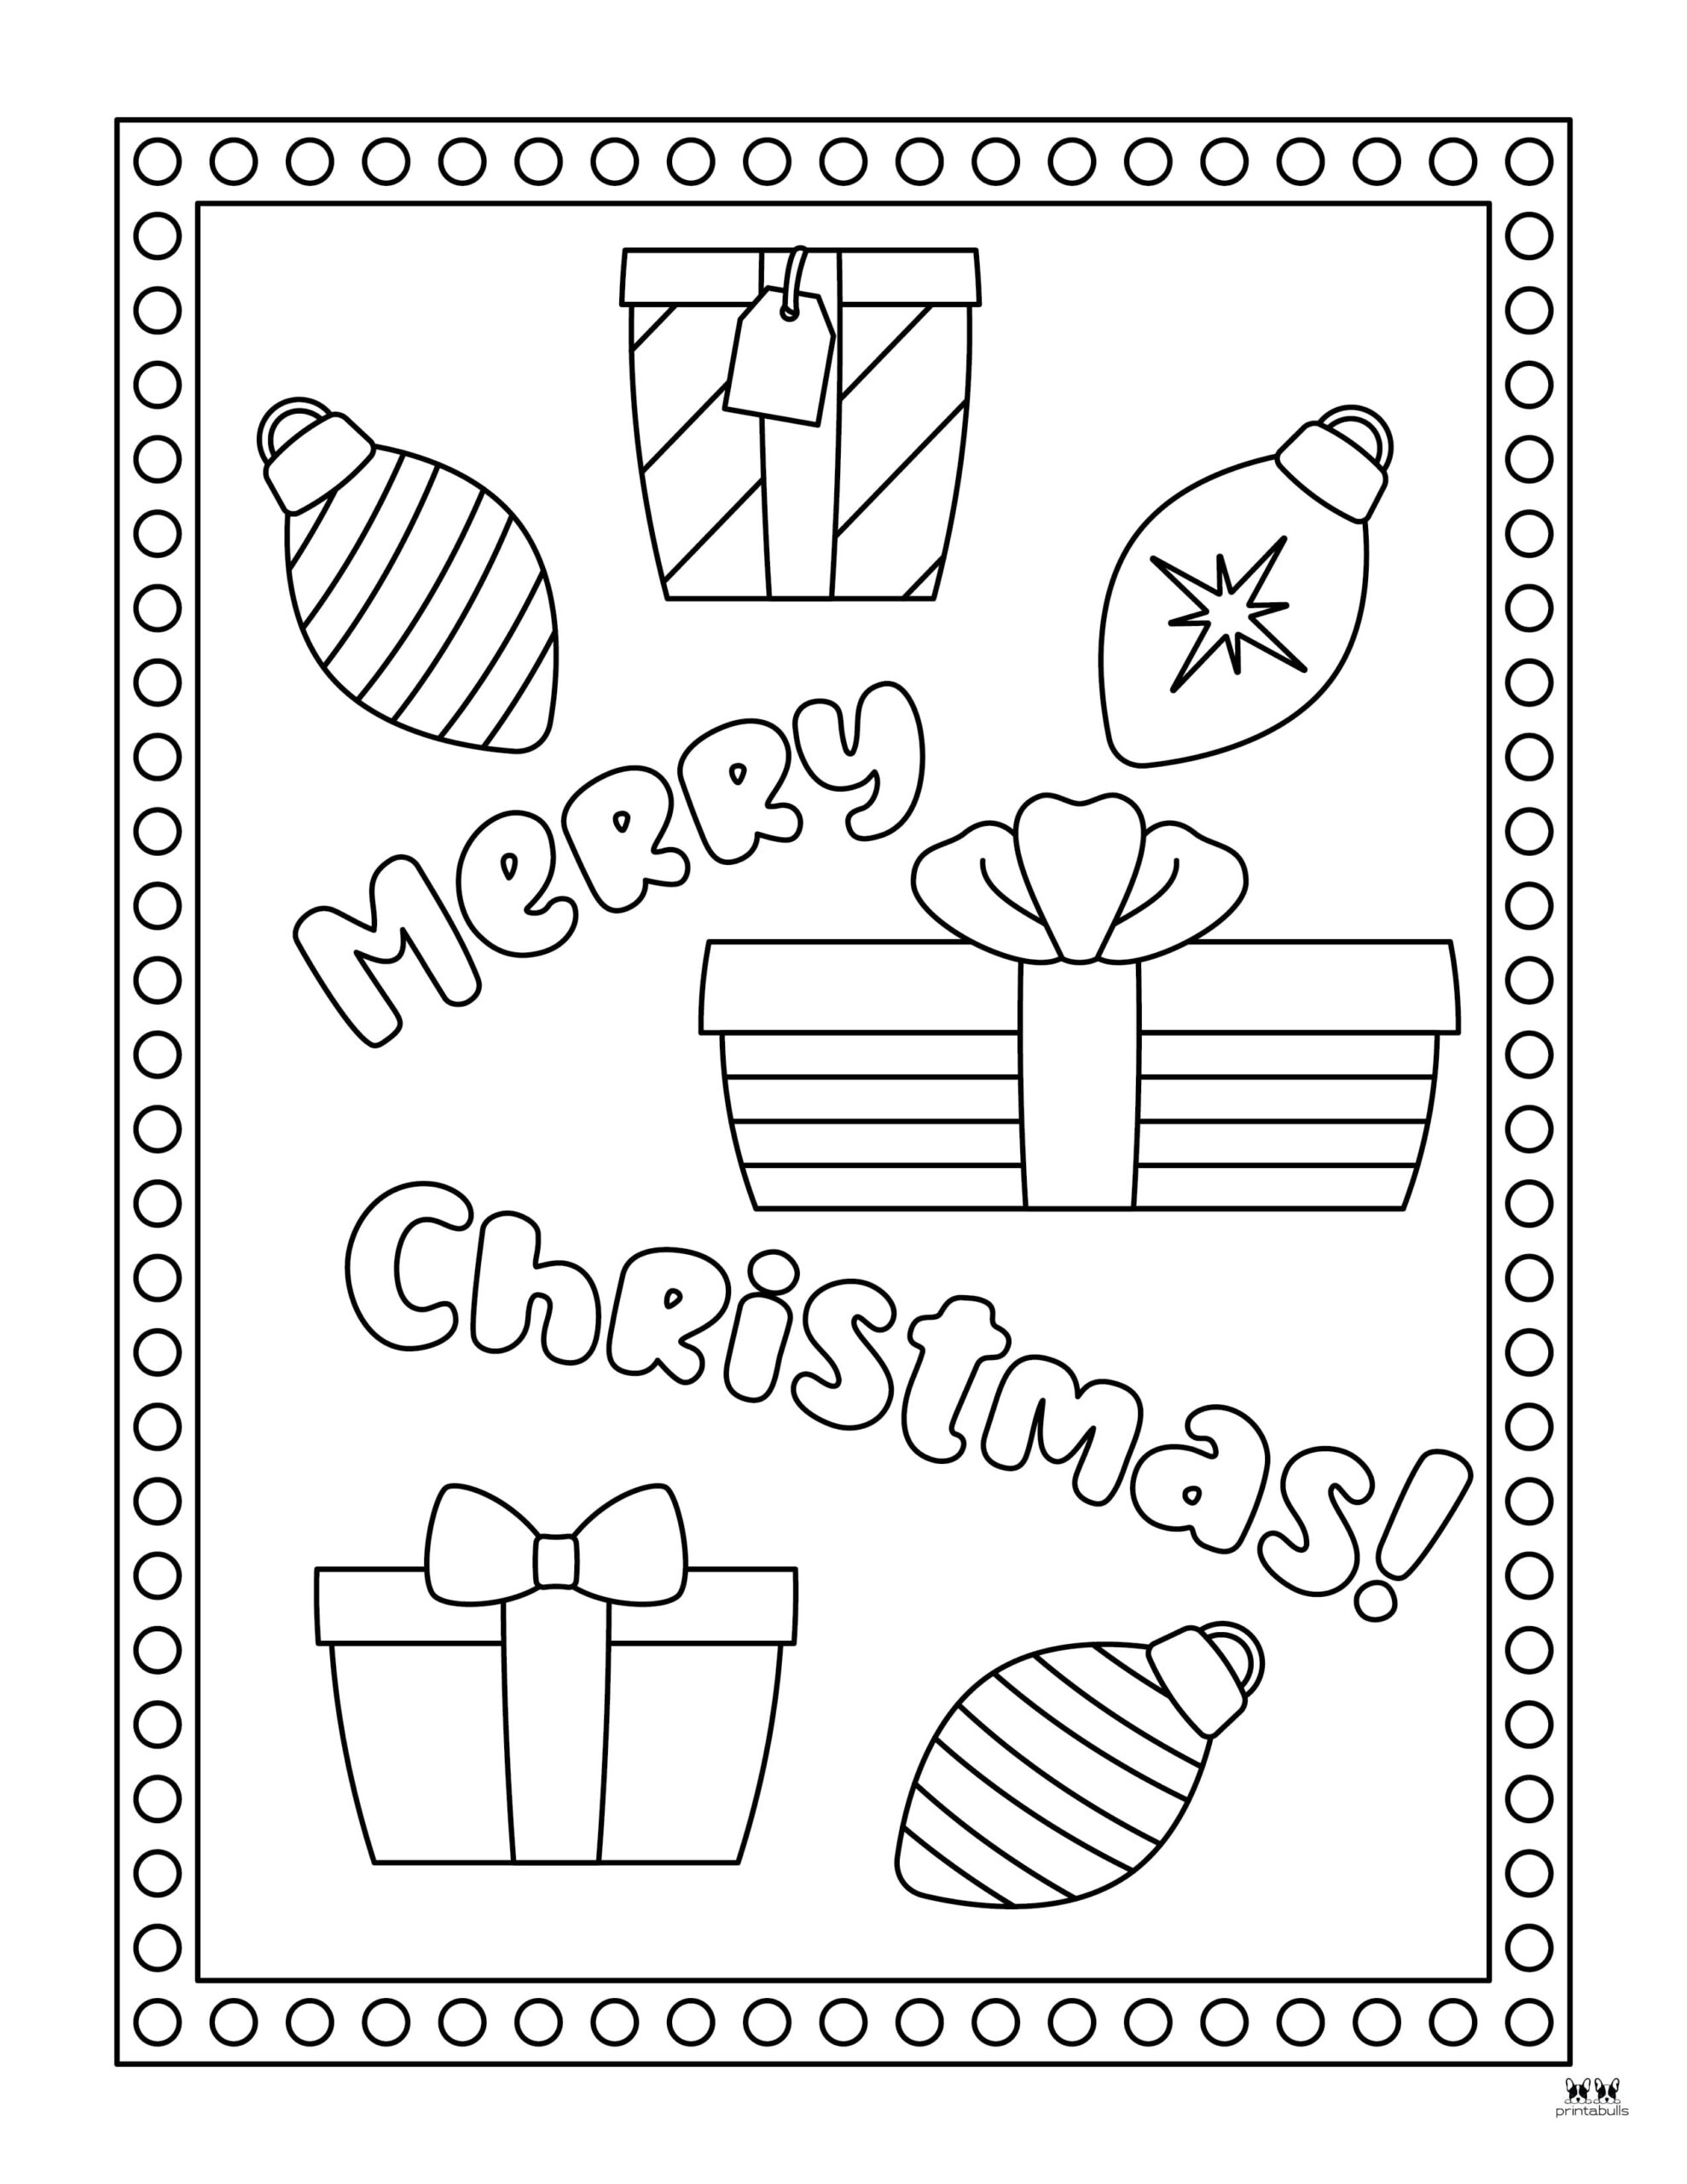 Christmas Present Coloring Pages - 25 FREE Pages | Printabulls